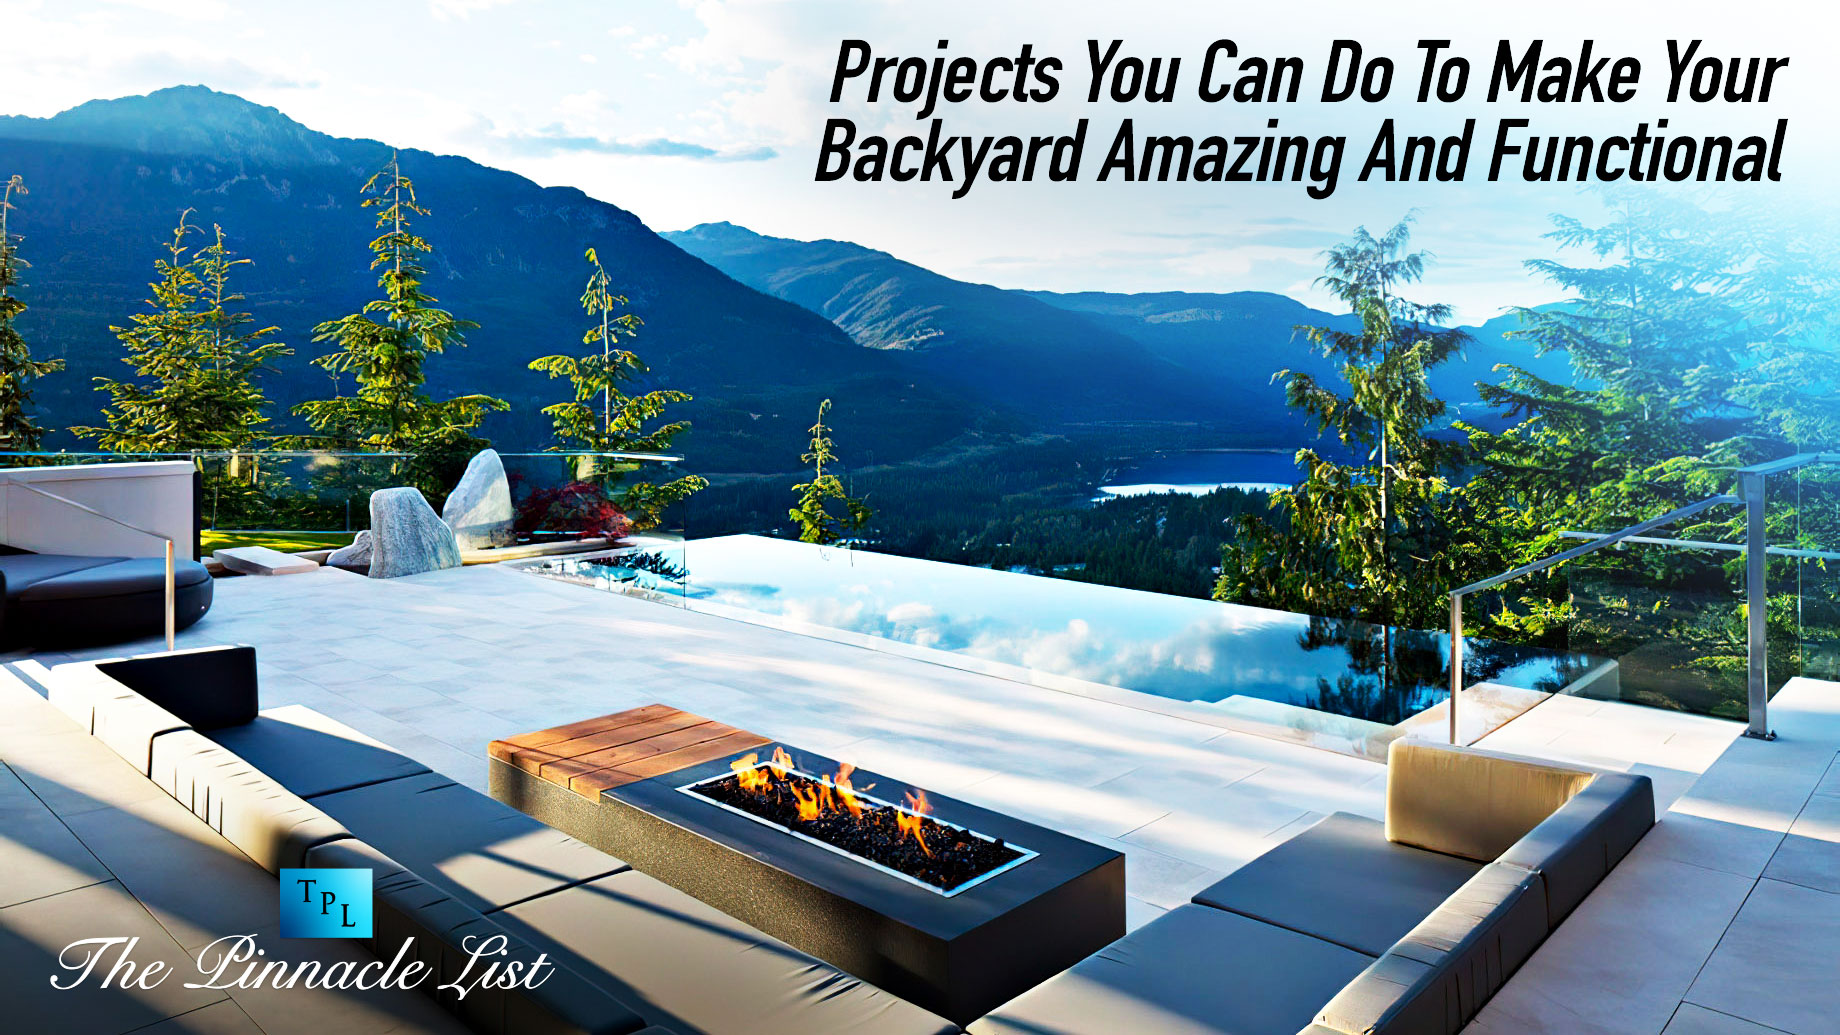 Projects You Can Do To Make Your Backyard Amazing And Functional